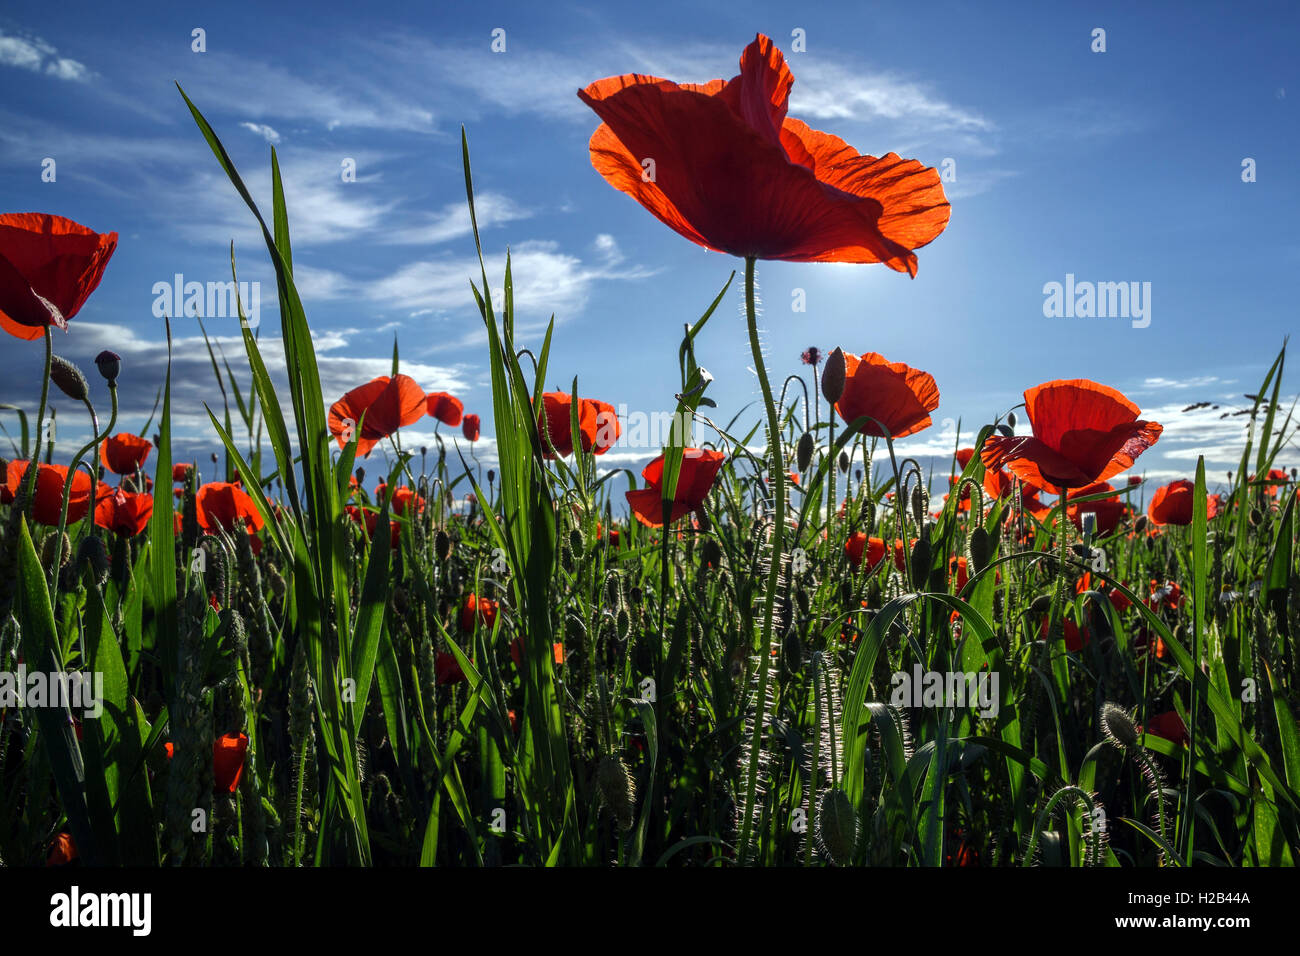 Poppy field, common poppies (Papaver rhoeas) in backlight, worm's eye view, Baden-Württemberg, Germany Stock Photo